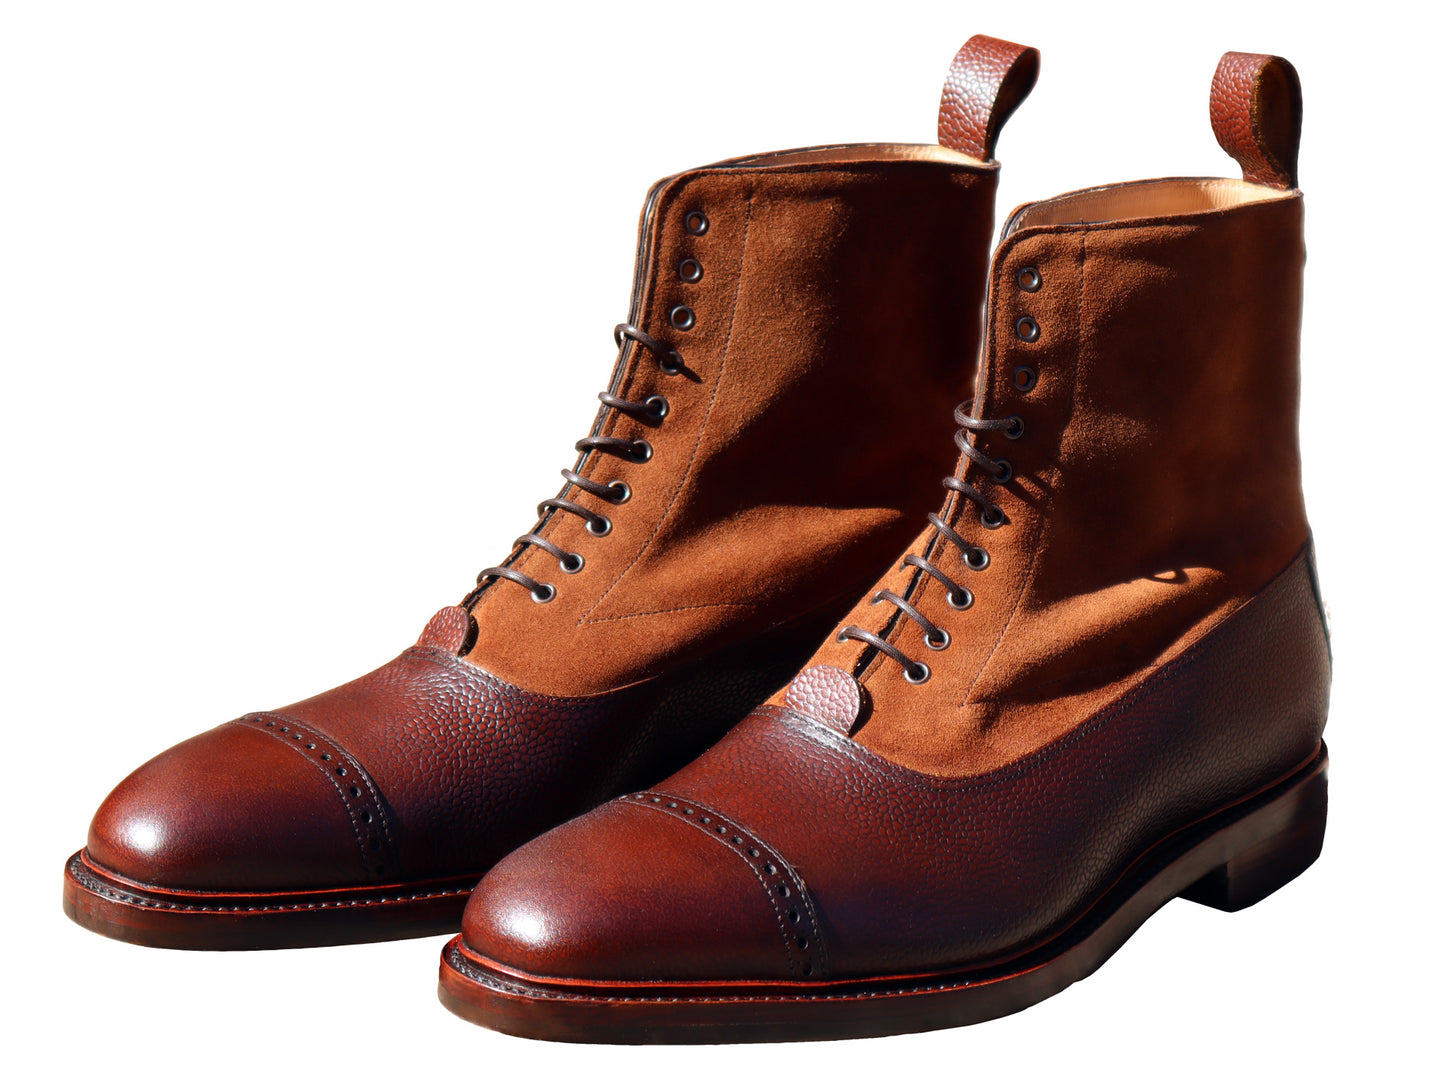 The Oxford Boot | Oxblood Grain & Tan Suede